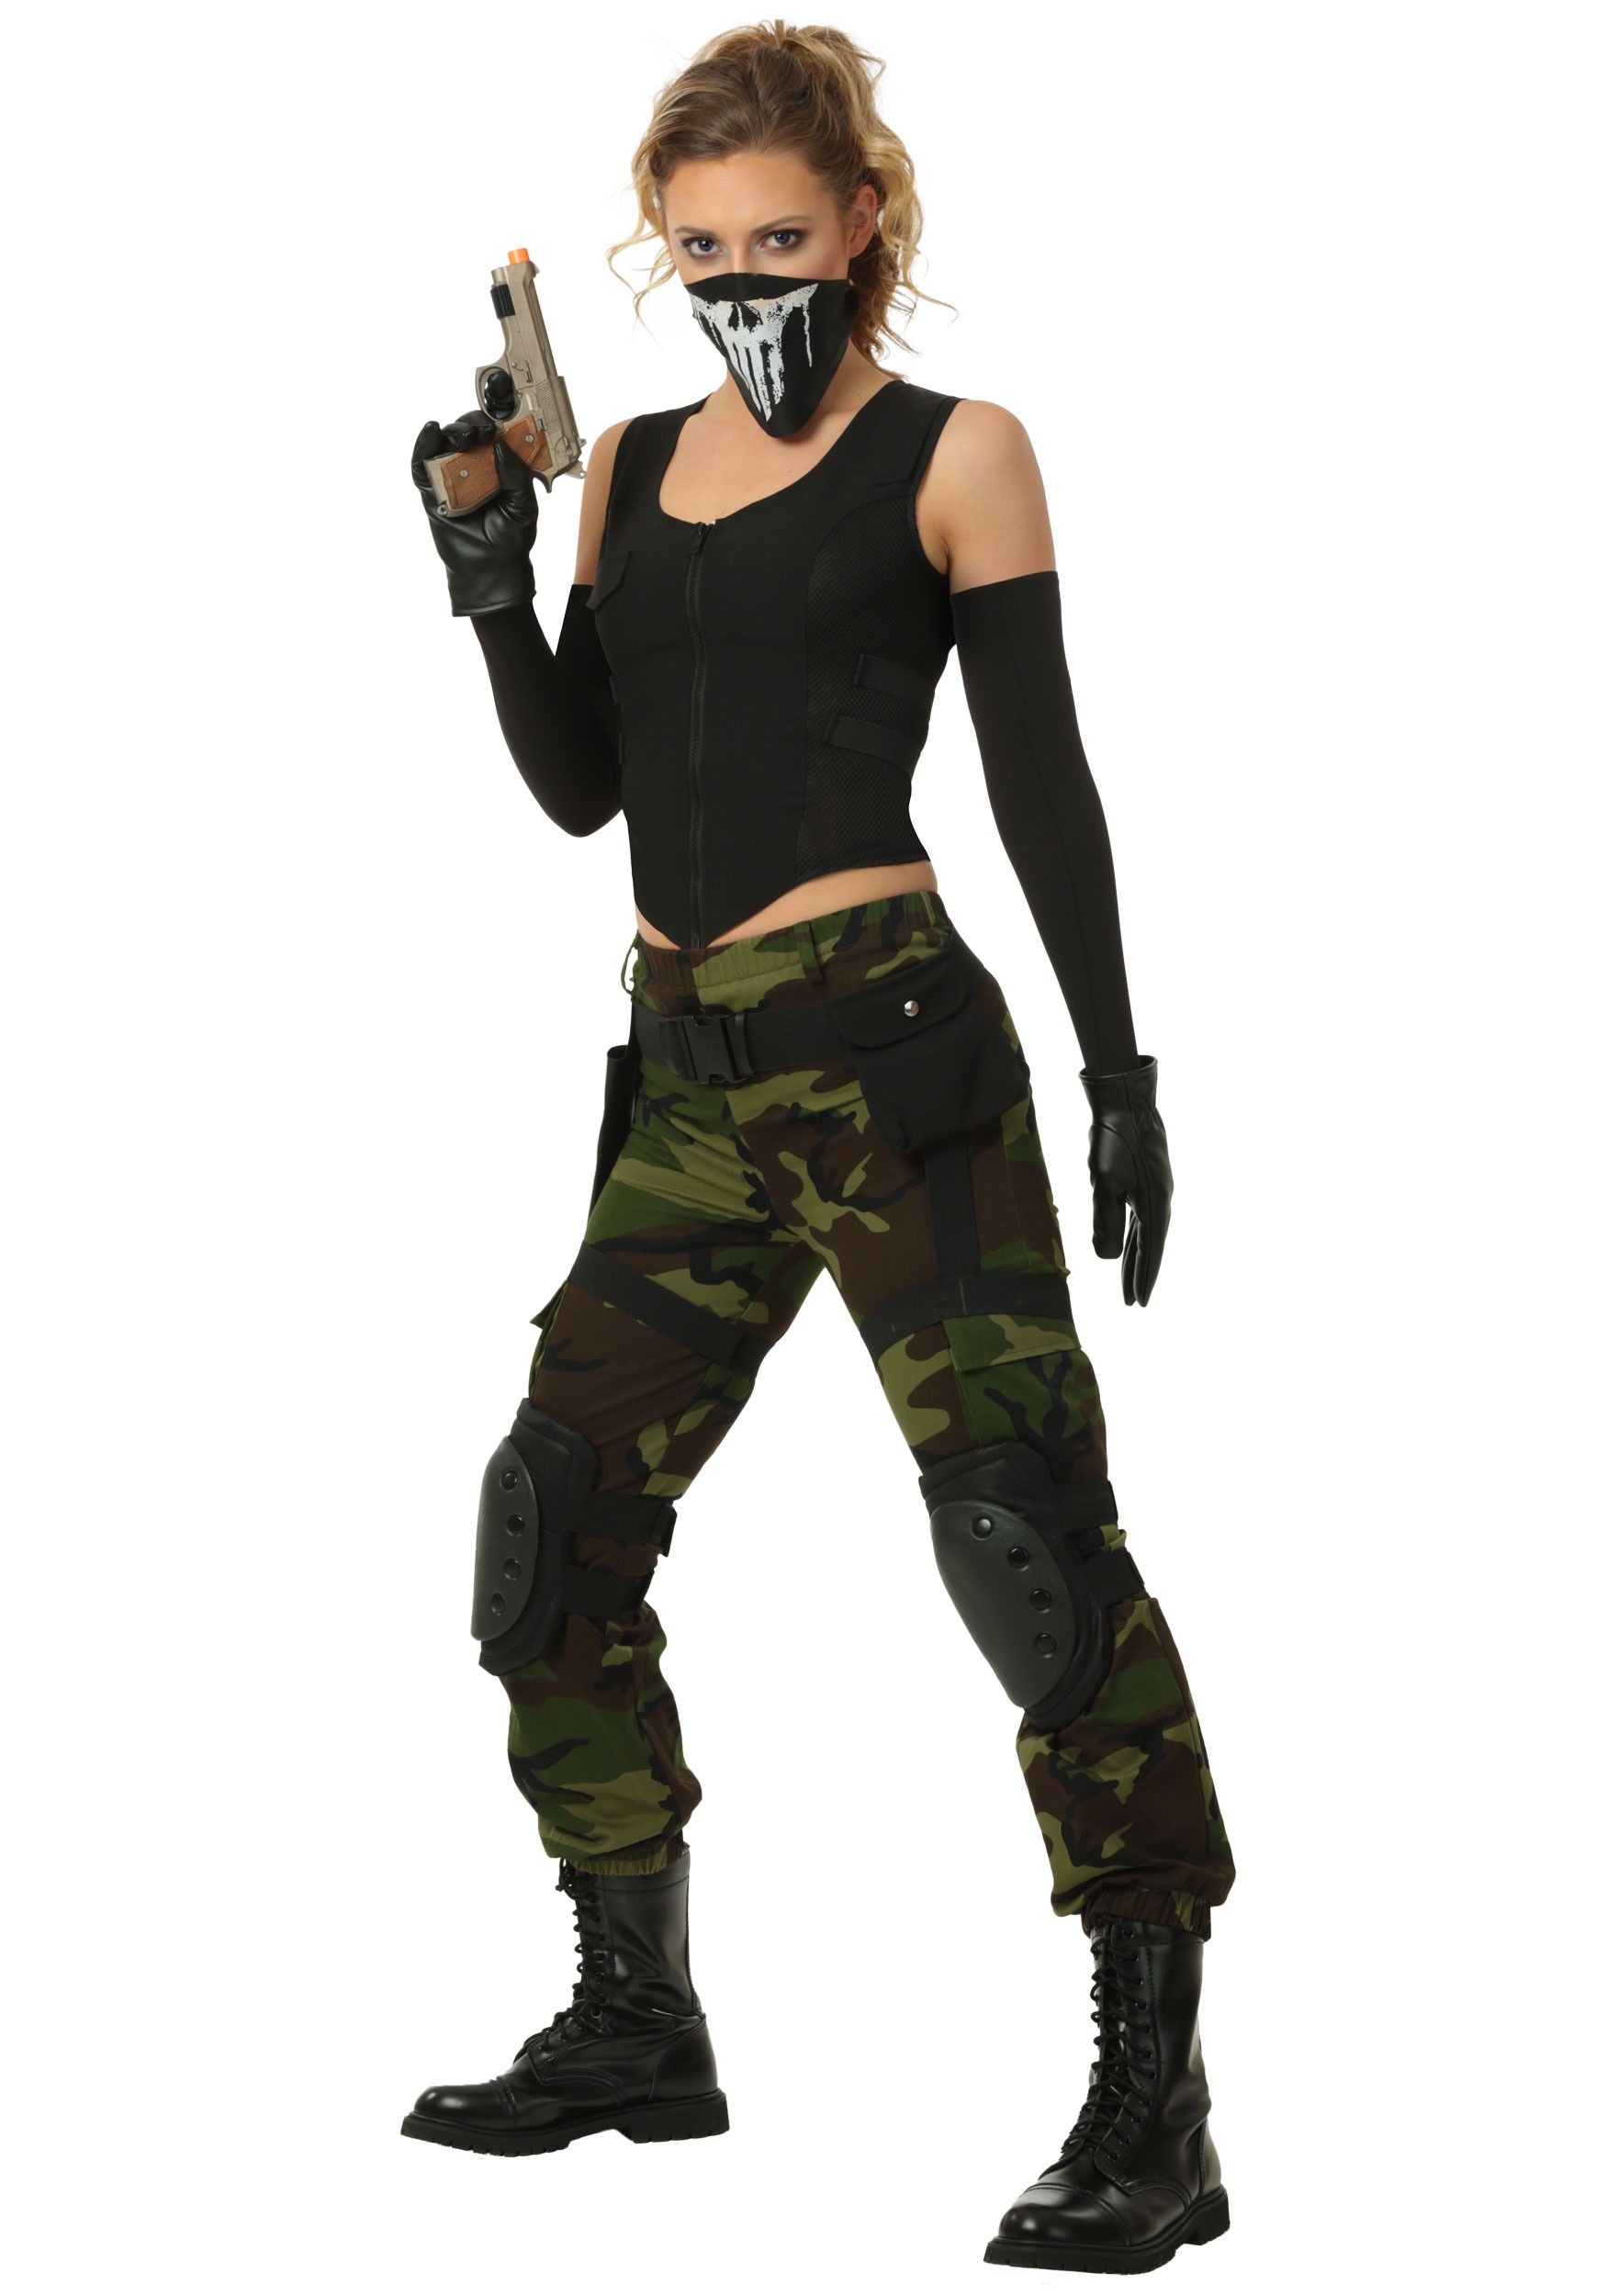 https://images.halloweencostumes.ca/products/38482/1-1/fighting-soldier-womens-plus-size-costume.jpg